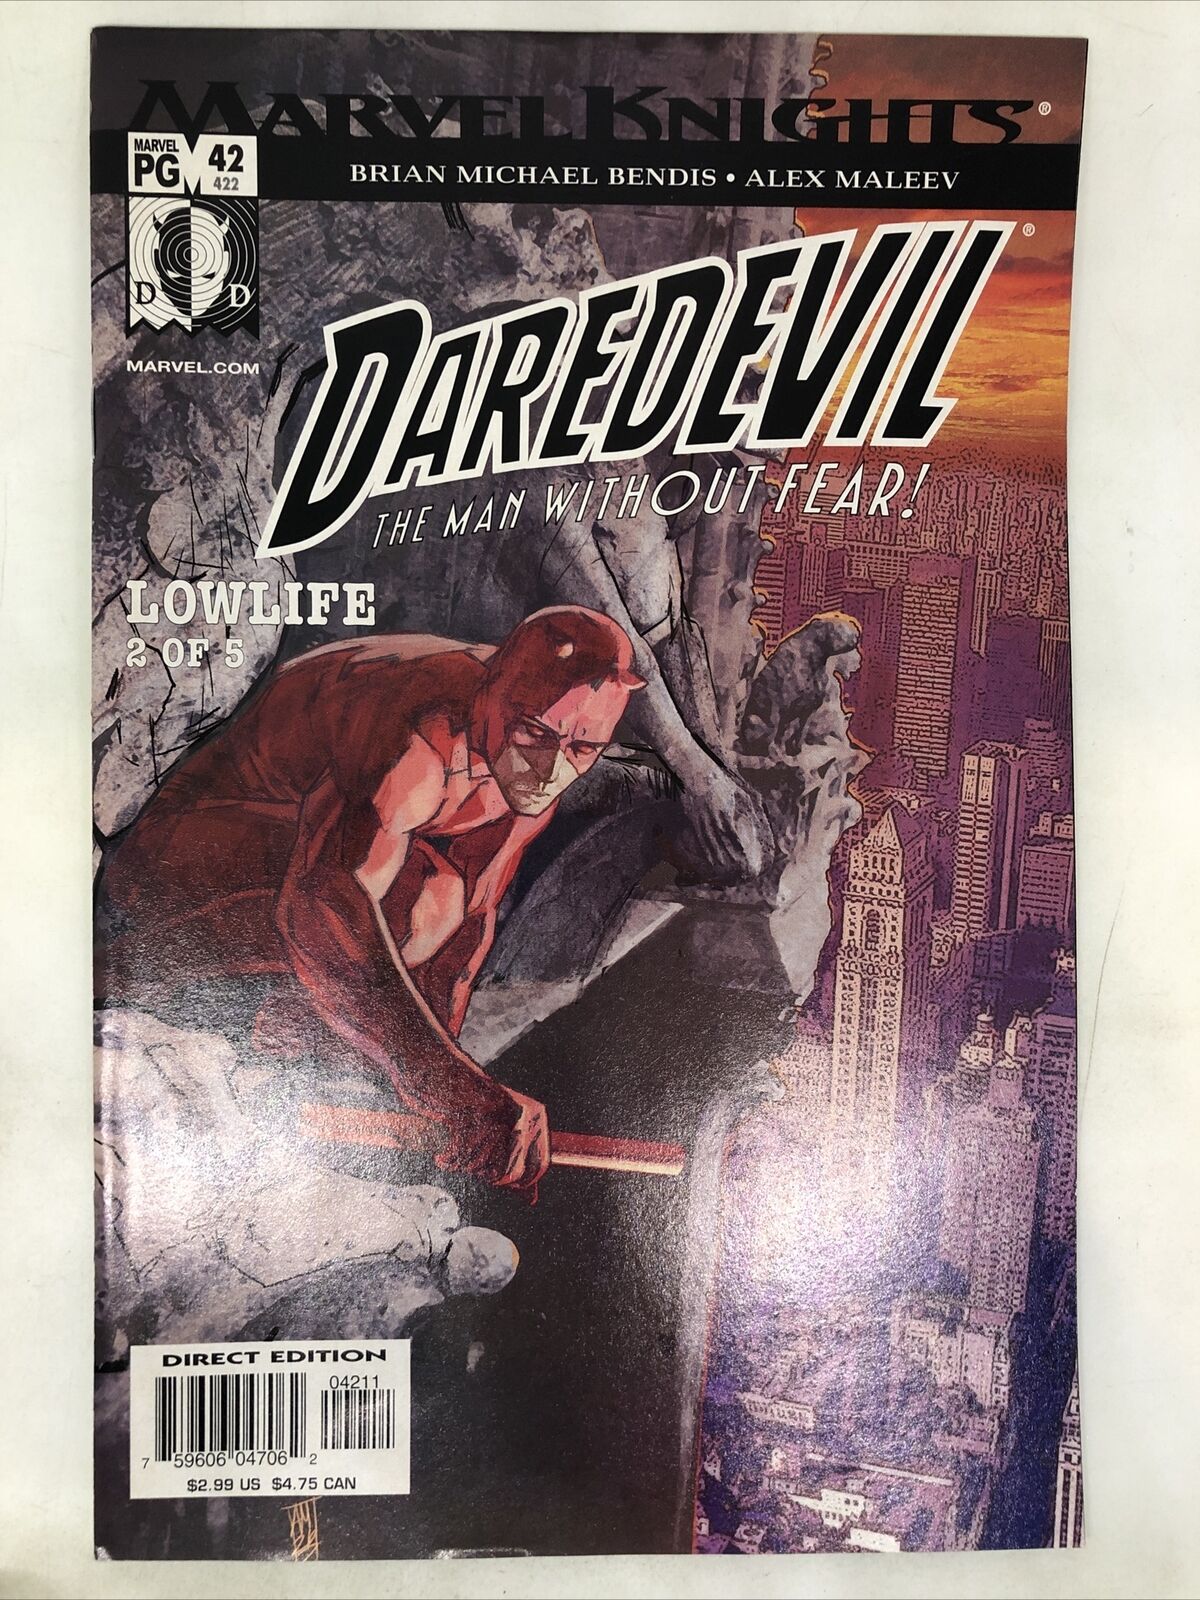 Daredevil - The Man Without Fear - #42 - Lowlife 2 of 5 - March 2003